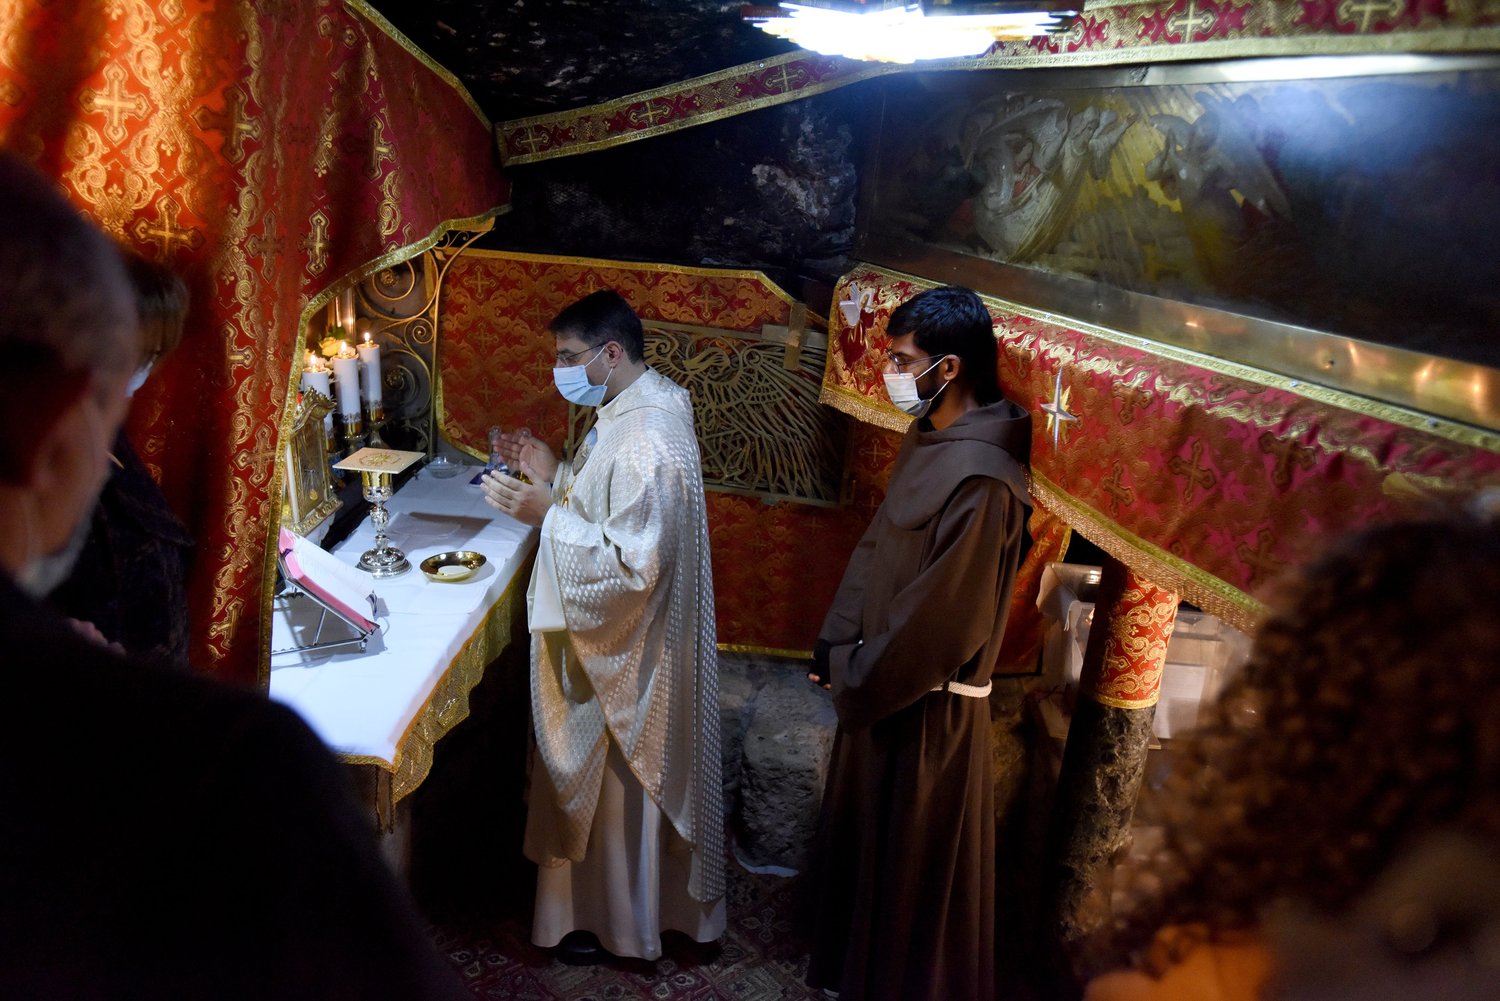 Palestinians attend Mass on Christmas morning in the grotto of the Church of the Nativity in Bethlehem, West Bank, Dec. 25.